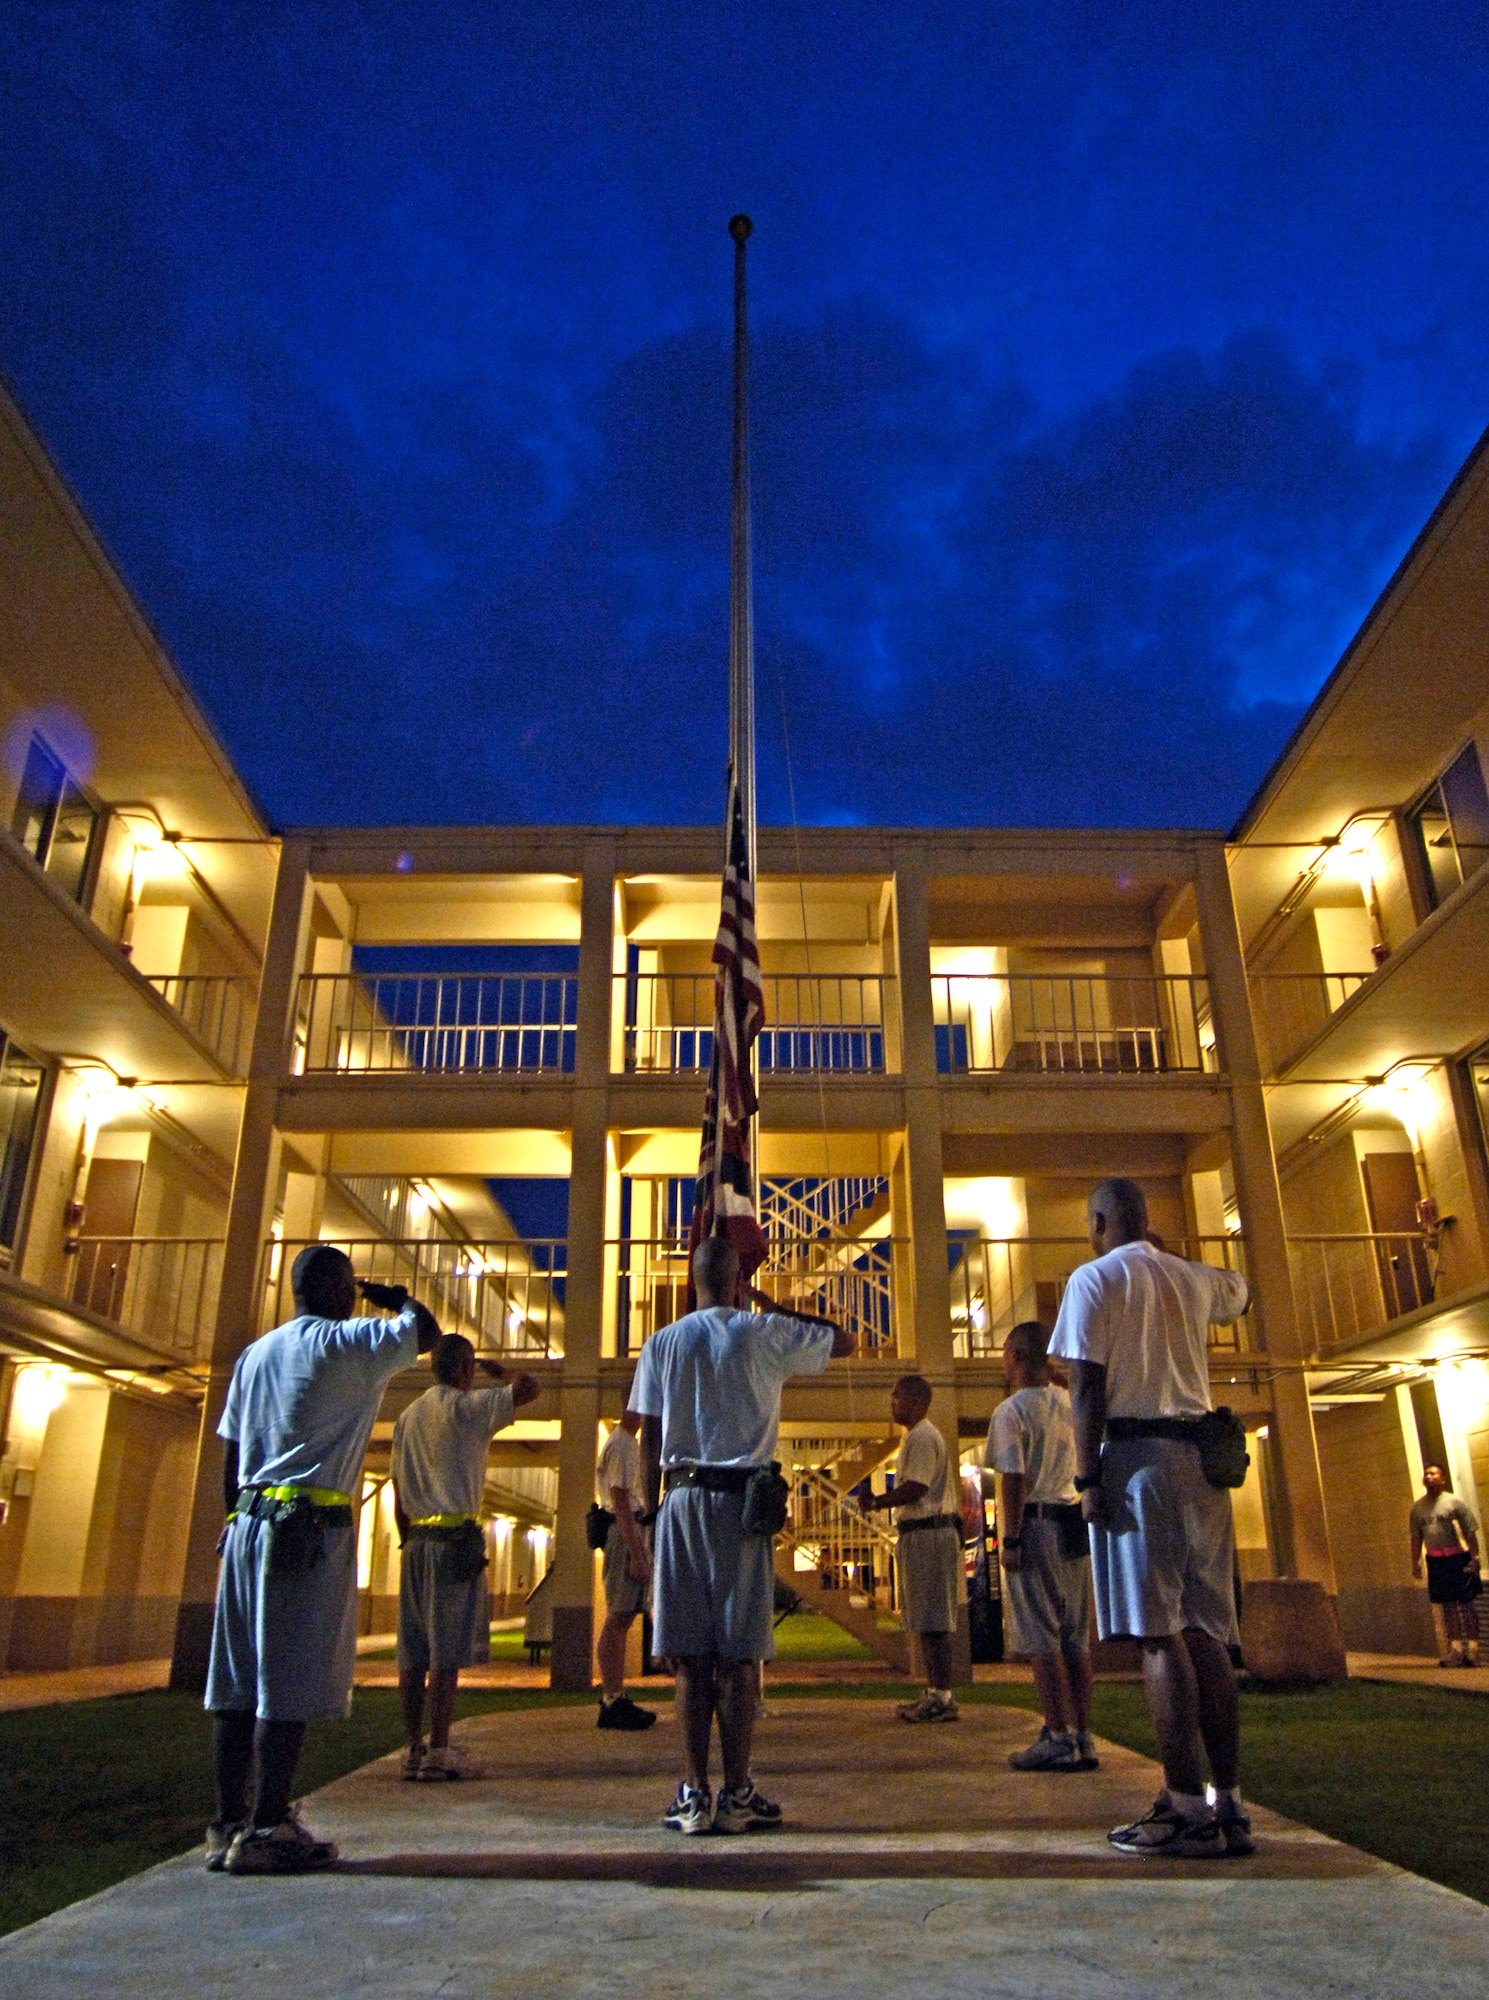 Cadets salute the flag at the Hawaii National Guard Youth Challenge Academy in Kapolei, Hawaii, on Thursday, May 18, 2006. The academy staff teach life skills to non-traditional students so they can be successful in the community and earn a high school diploma.  (U.S. Air Force photo/Tech. Sgt. Shane A. Cuomo)